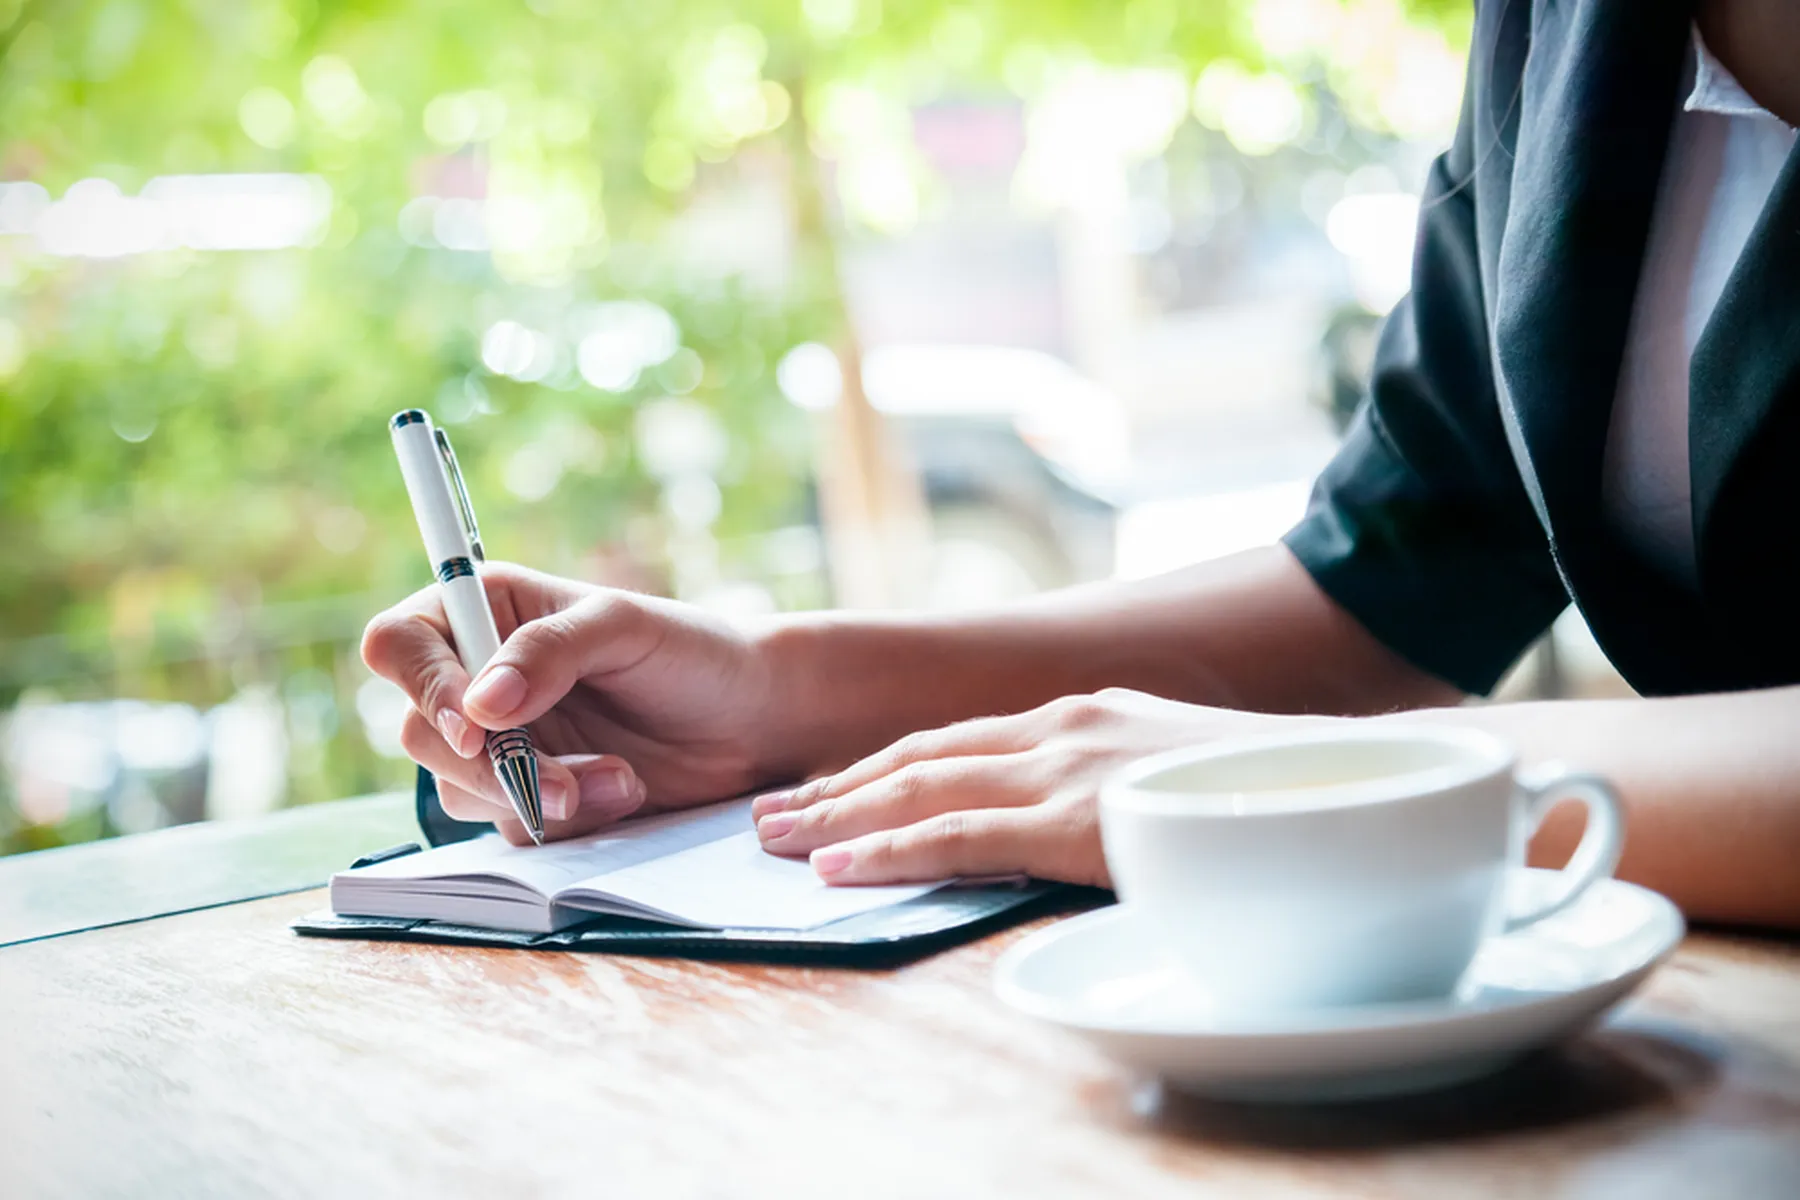 A person's hands are seen writing in a journal with a coffee cup next to them.